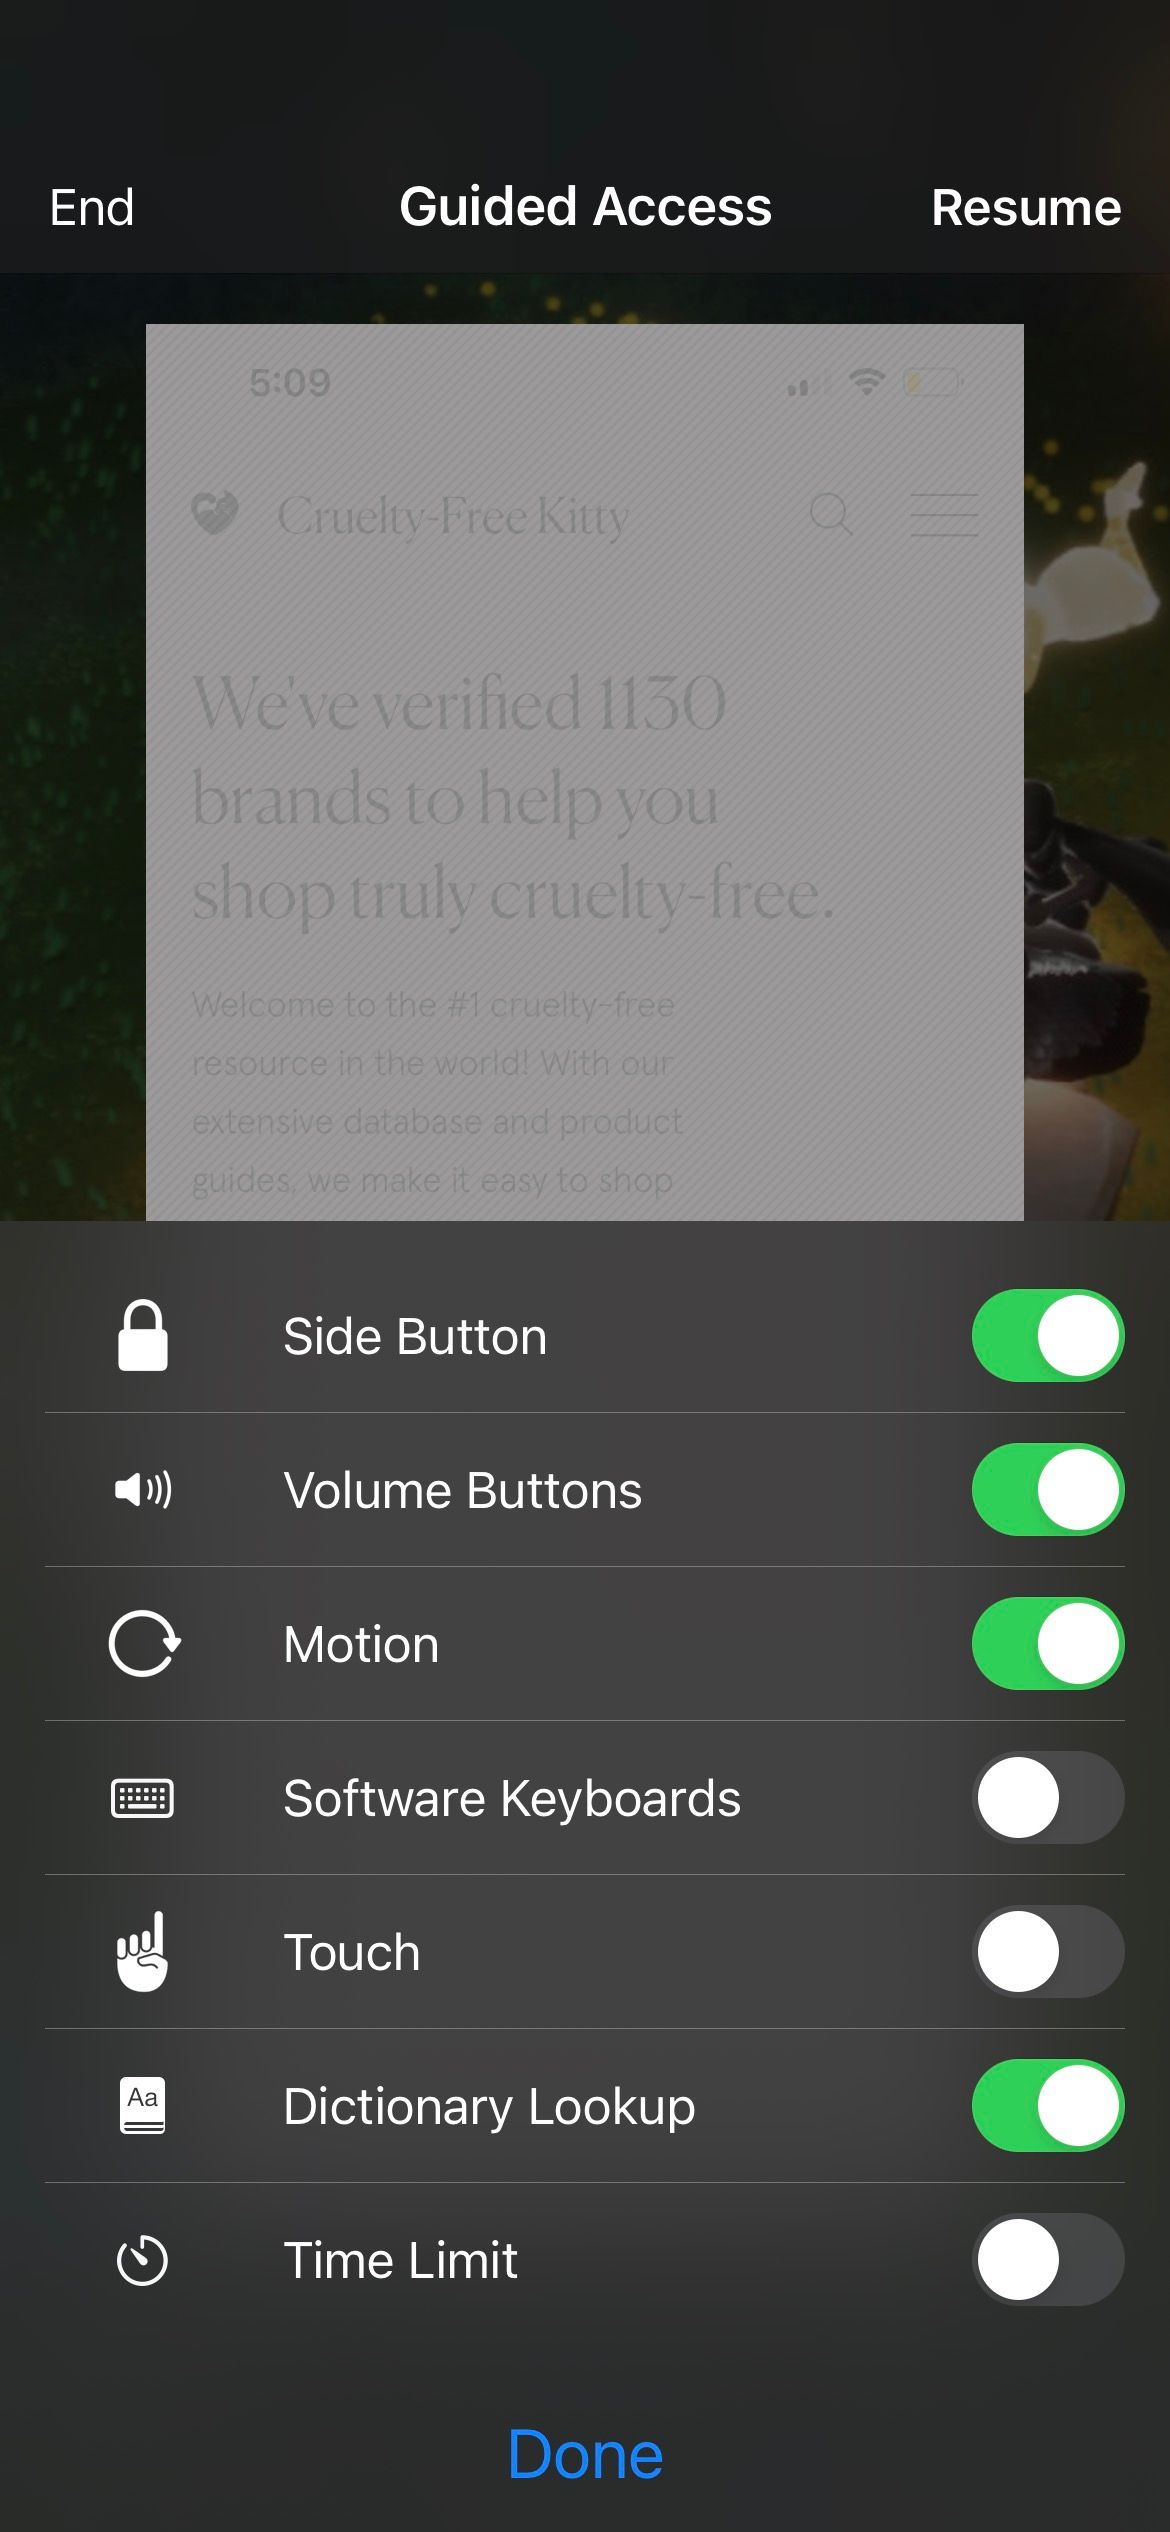 Customize Guided Access Restrictions on iPhone